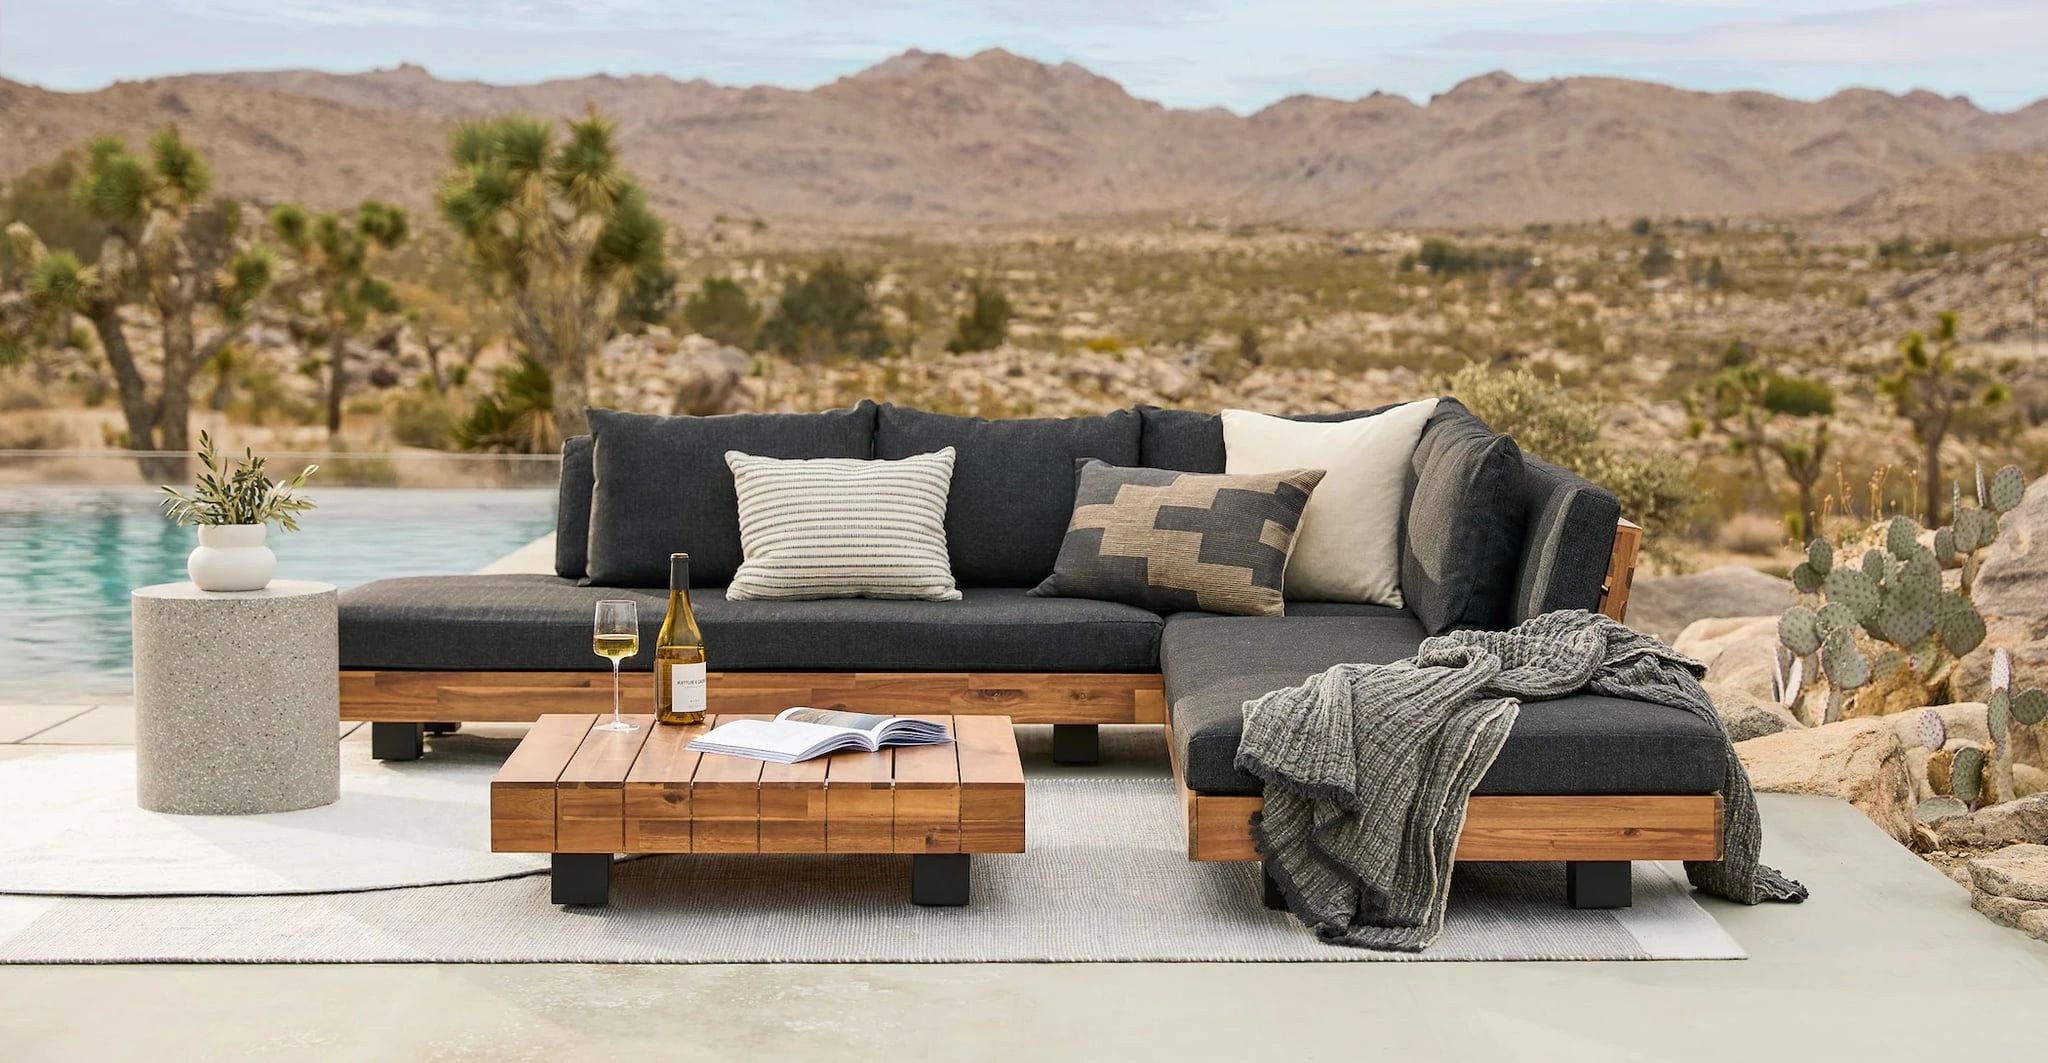 Famous Outdoor Couch Cushions, Throw Pillows And Slat Coffee Table Inside The Most Comfortable Outdoor Furniture To Shop In  (View 12 of 15)